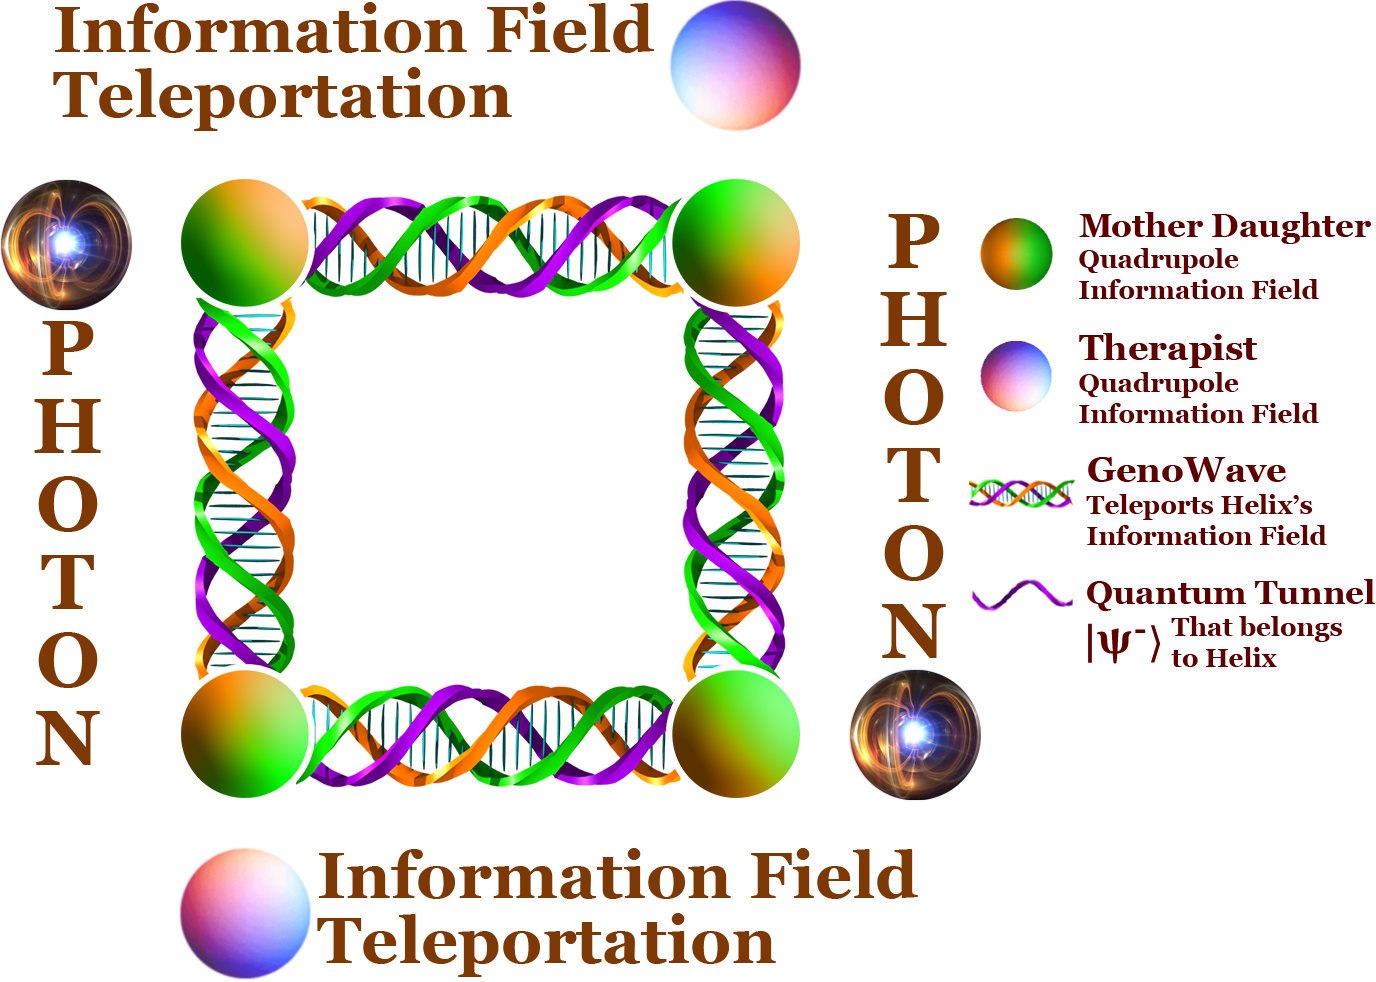 Quantum Holopedia ~ Quadrupole Genes Photons Information Field Interactions Iteration. Quadrupole process visualizes continuously iterative Information Field Teleportation on a larger scale, where Therapist's Quadrupole Information Field is included in the entangled Mother Daugther Quadrupole Information Field and a continuous transference of Therapits's Quadrupole Information Field to the system occures via GenoWave Teleports and Helix's Information Field. This interaction can also be modeled using holographic wormhole or tensor networks.